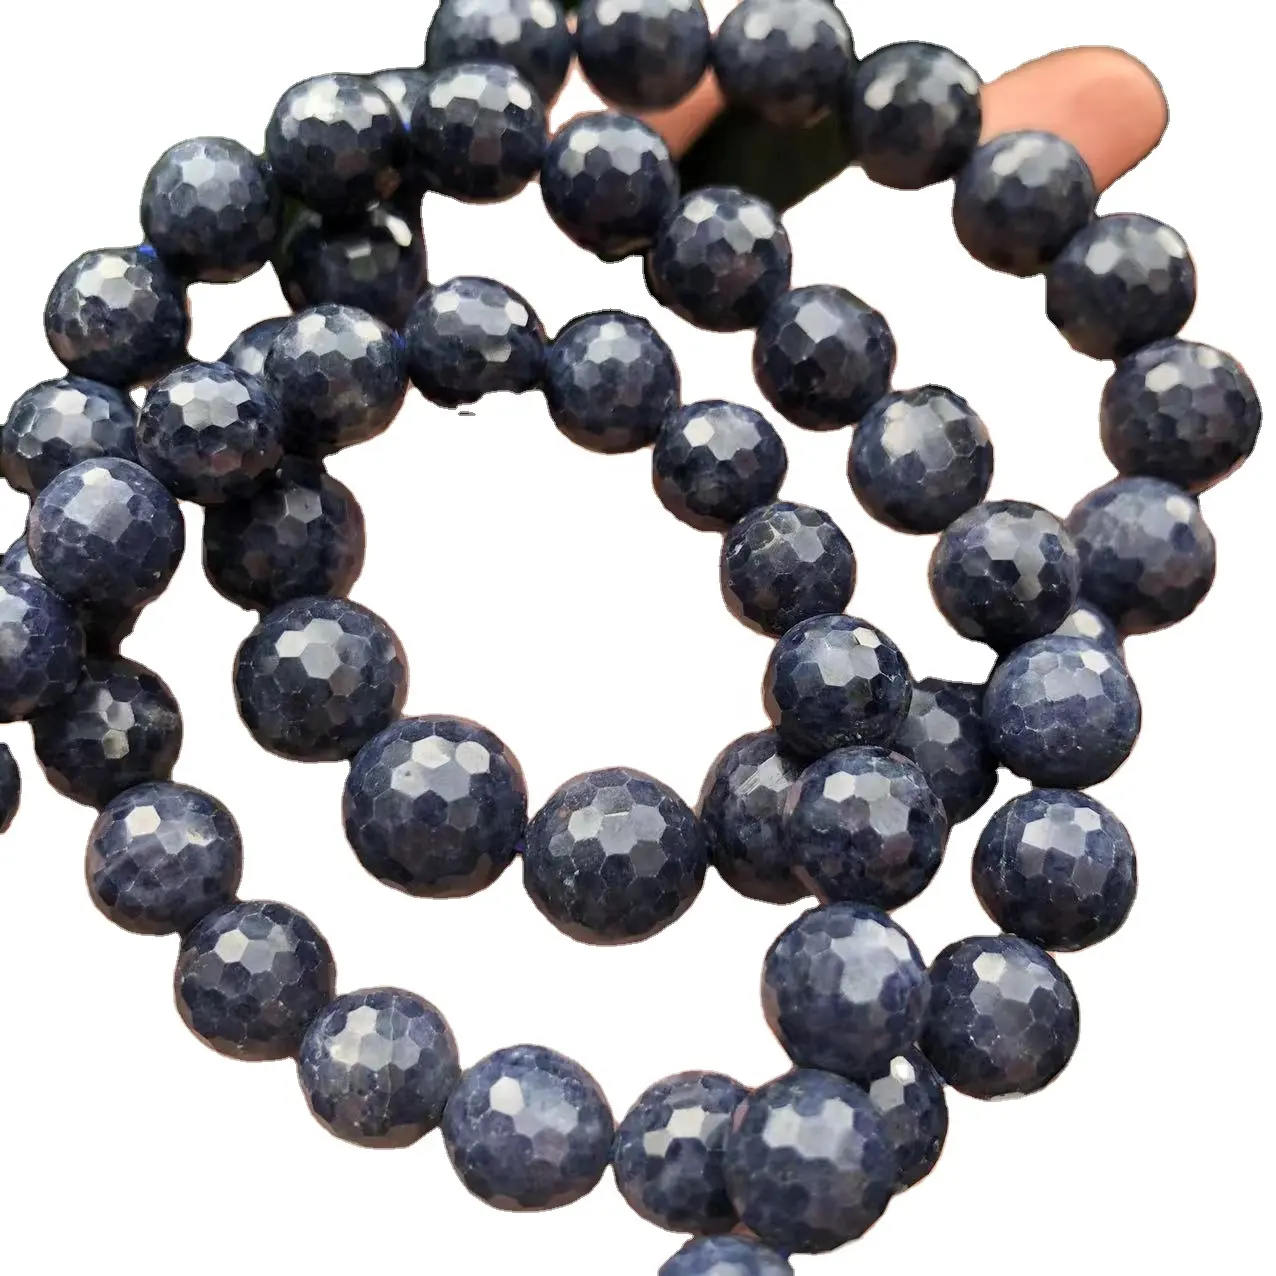 Natural genuine Top blue Sapphire faceted round semi-precious gemstone loose beads stone for jewelry making design